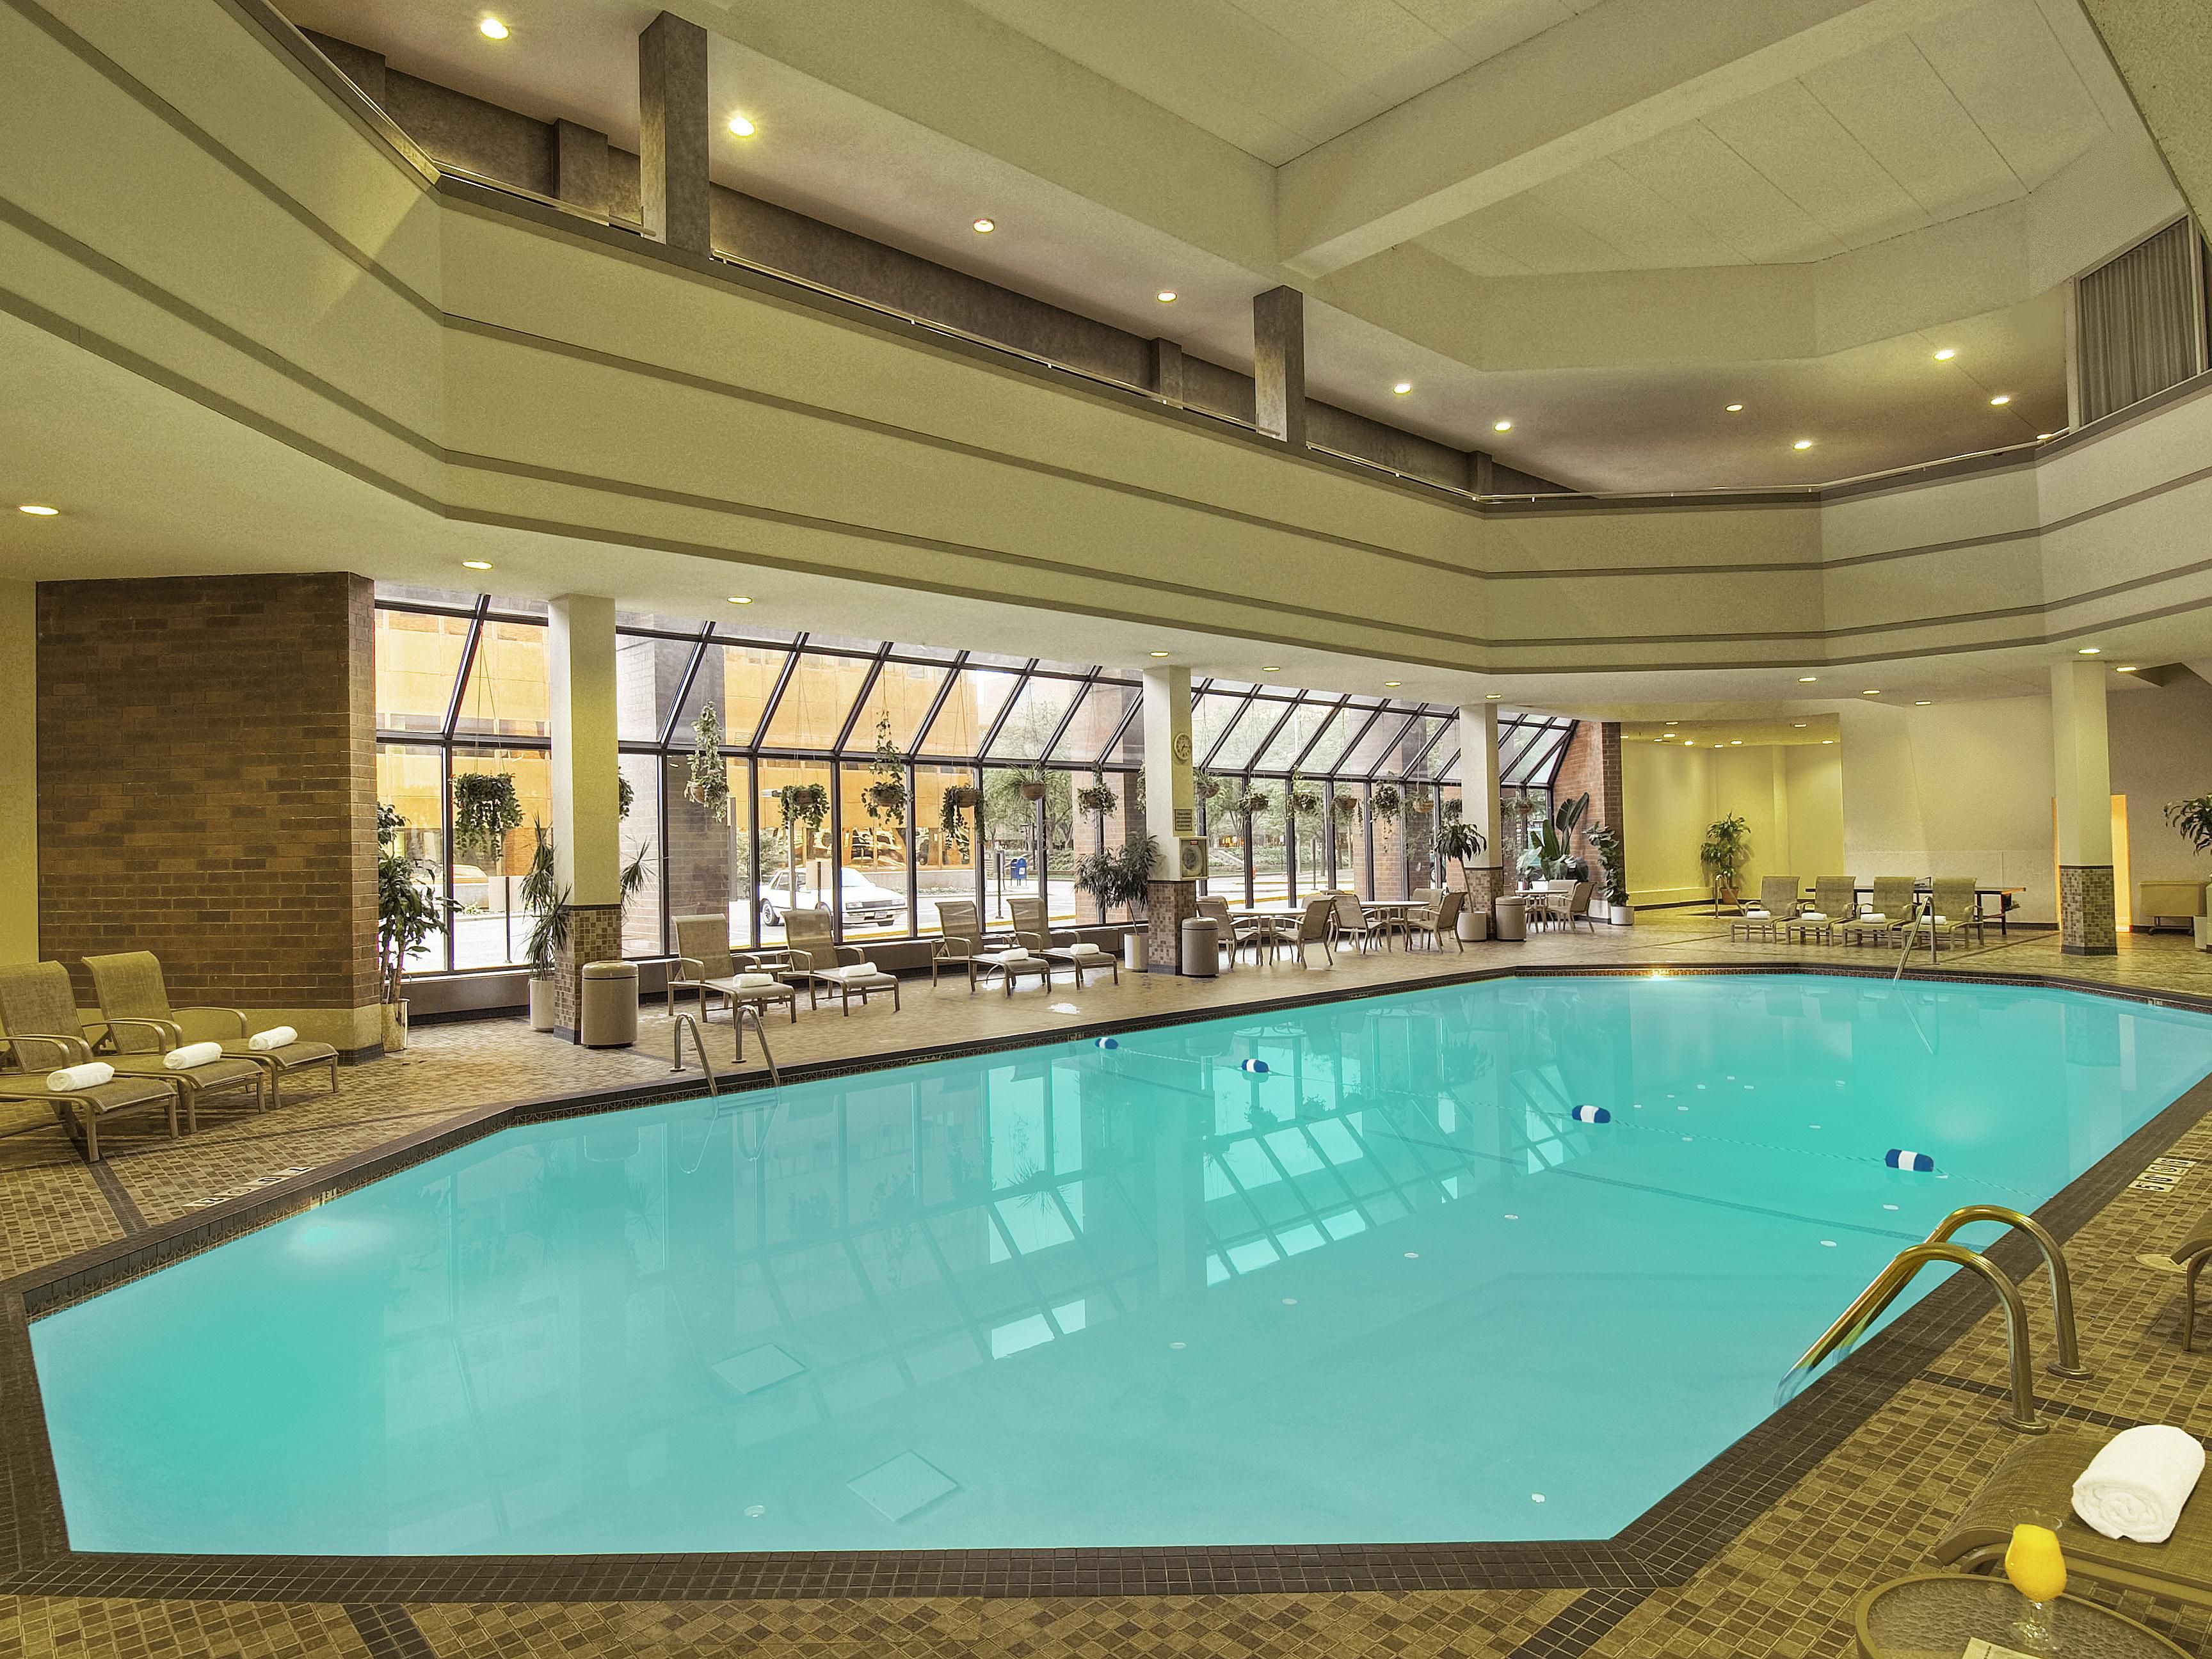 Enjoy the area's largest hotel indoor heated saltwater pool!  Unwind after a long flight, shopping at Mall of America or day of meetings in our rejuvenating pool! Pool, hot tub and sauna are available for your use!